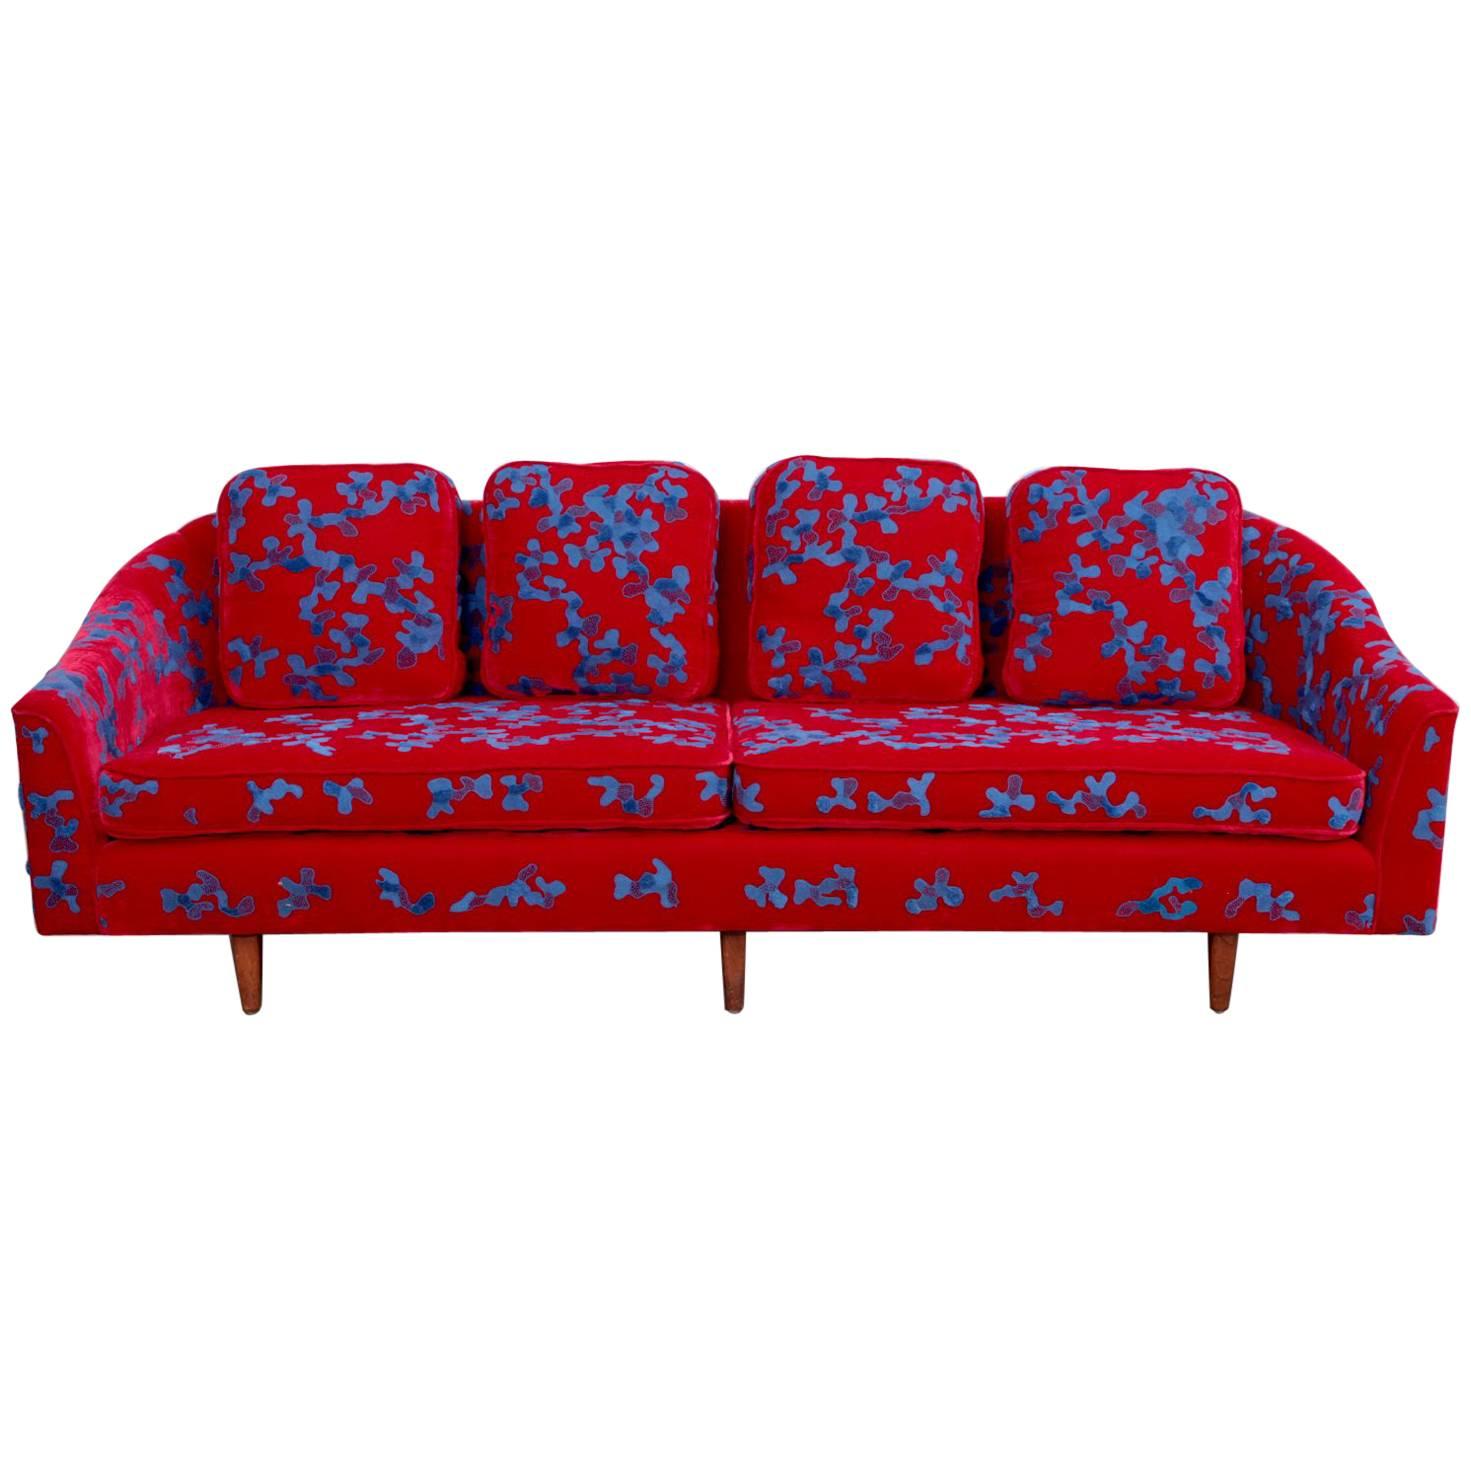 Red and Blue Harvey Probber Sofa with Jupe by Jackie Hand Embroidered Fabric For Sale